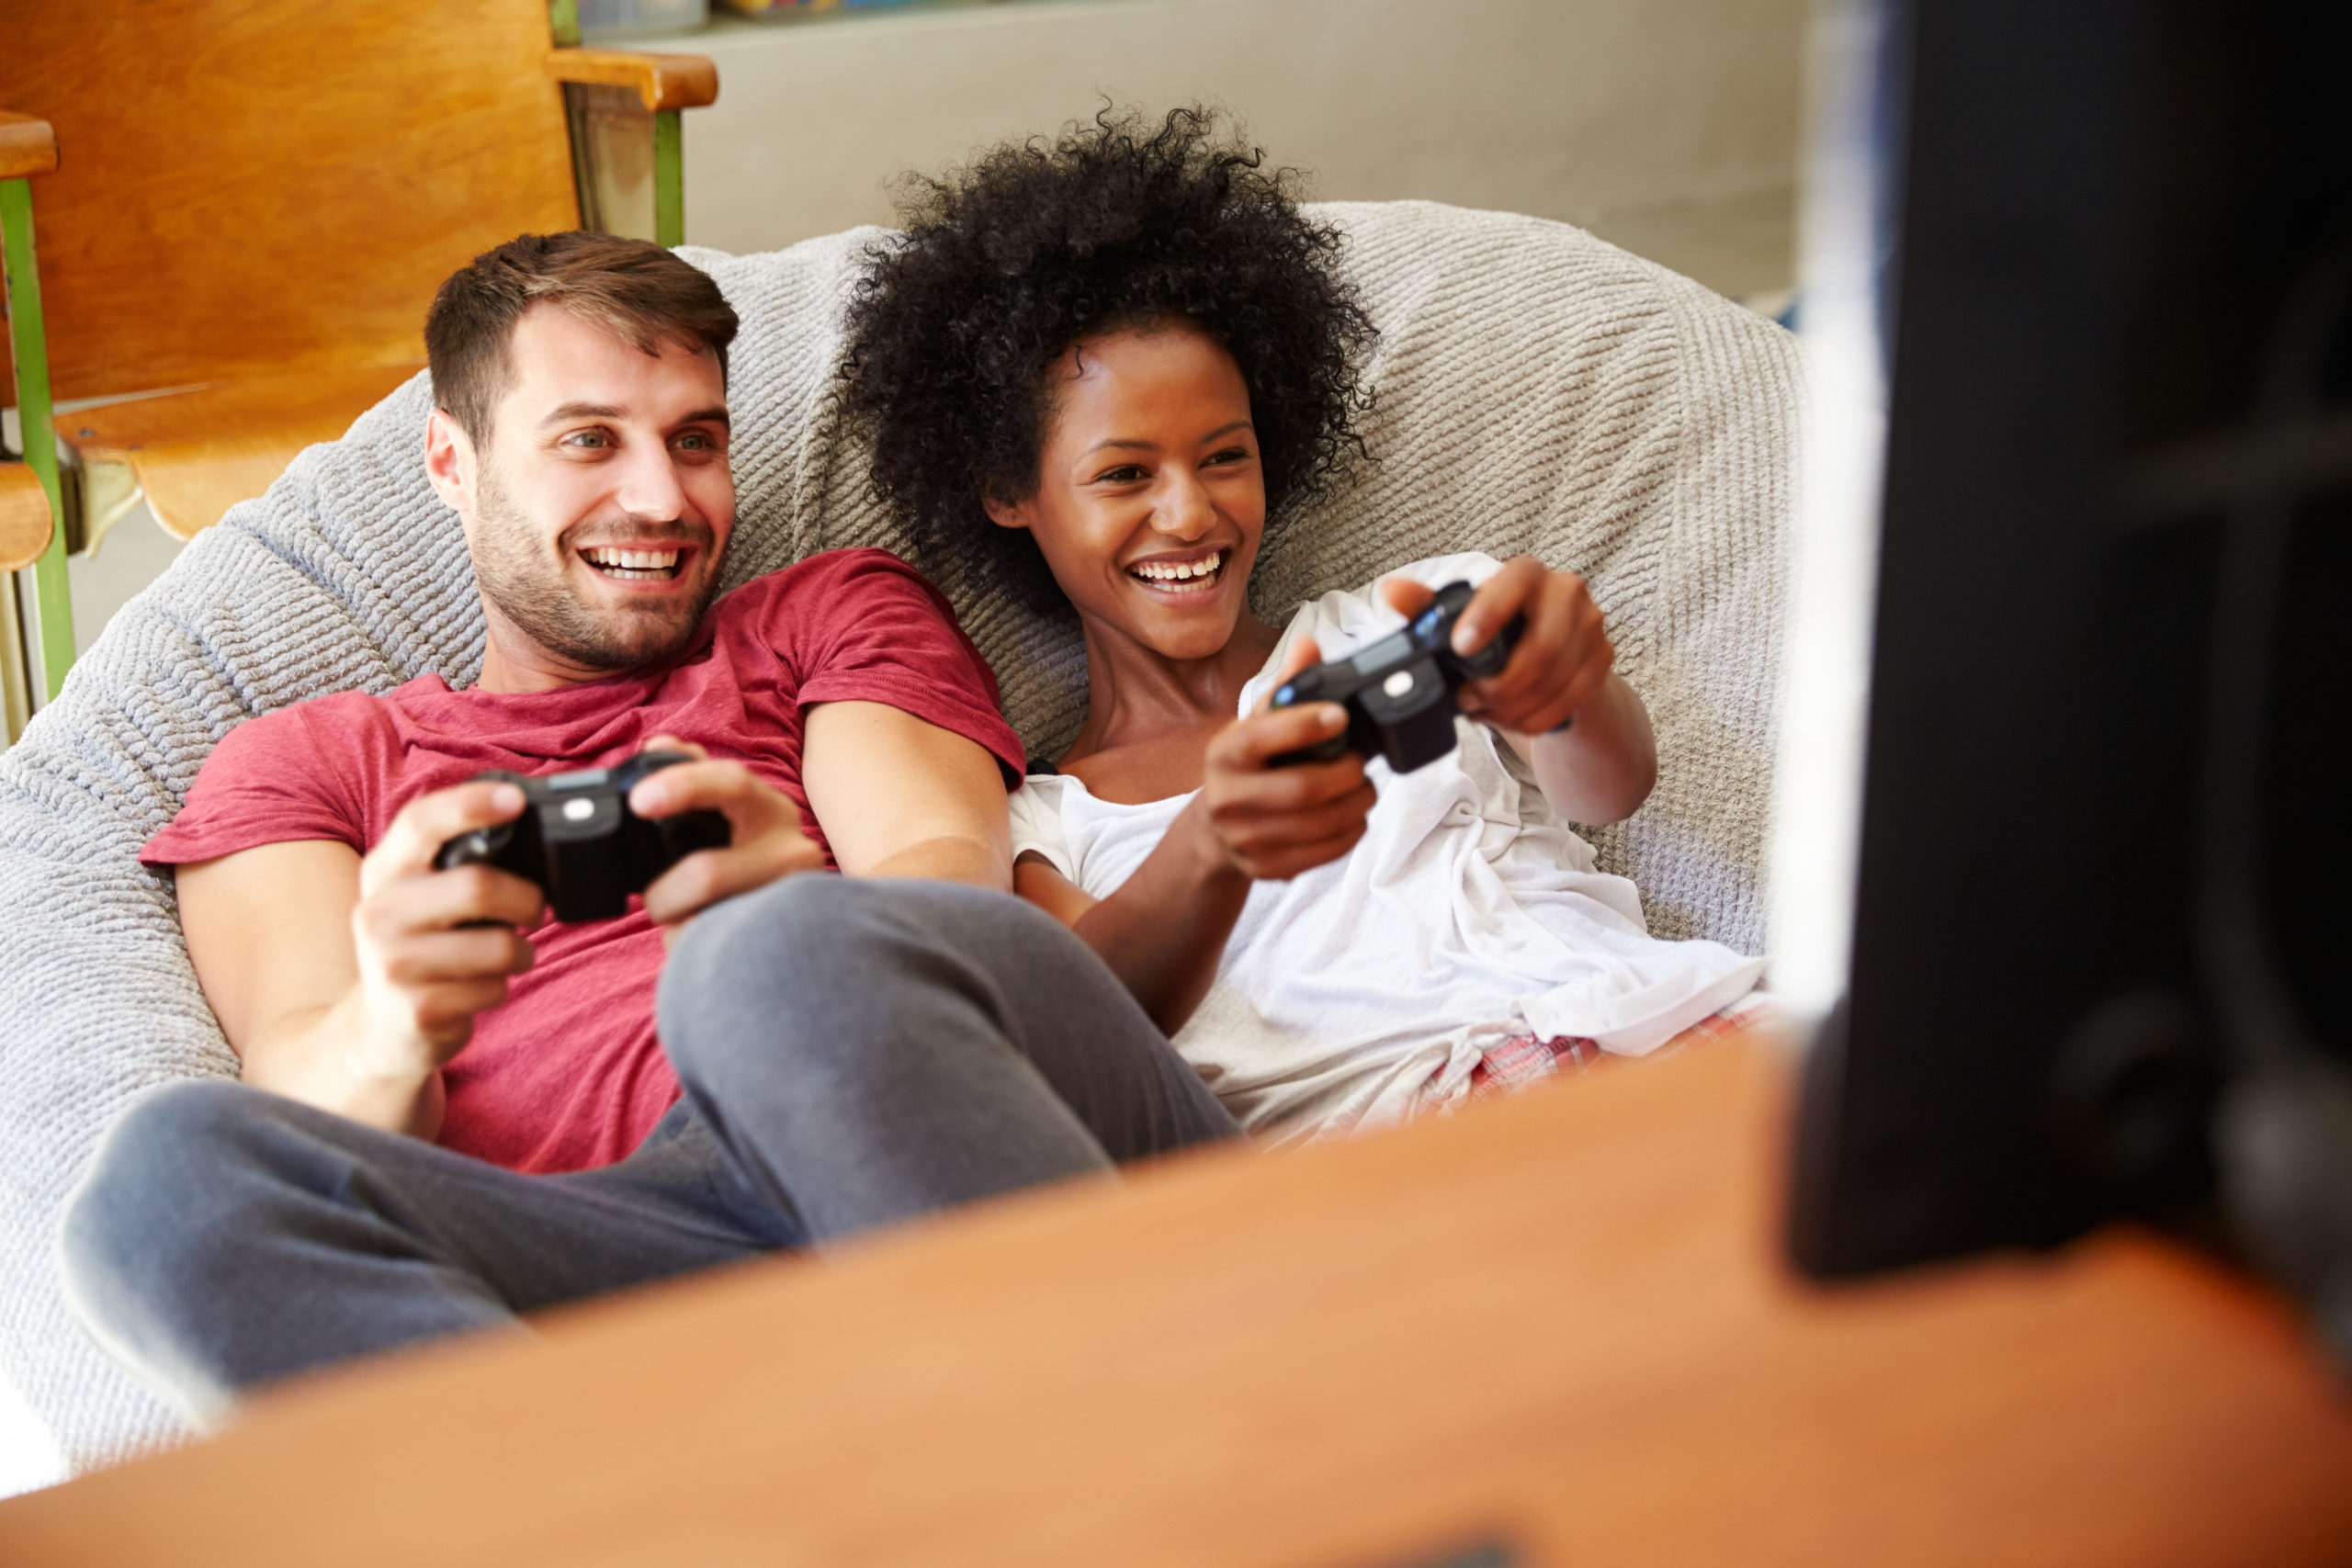 Top 5 video games for date night: play with the one you love